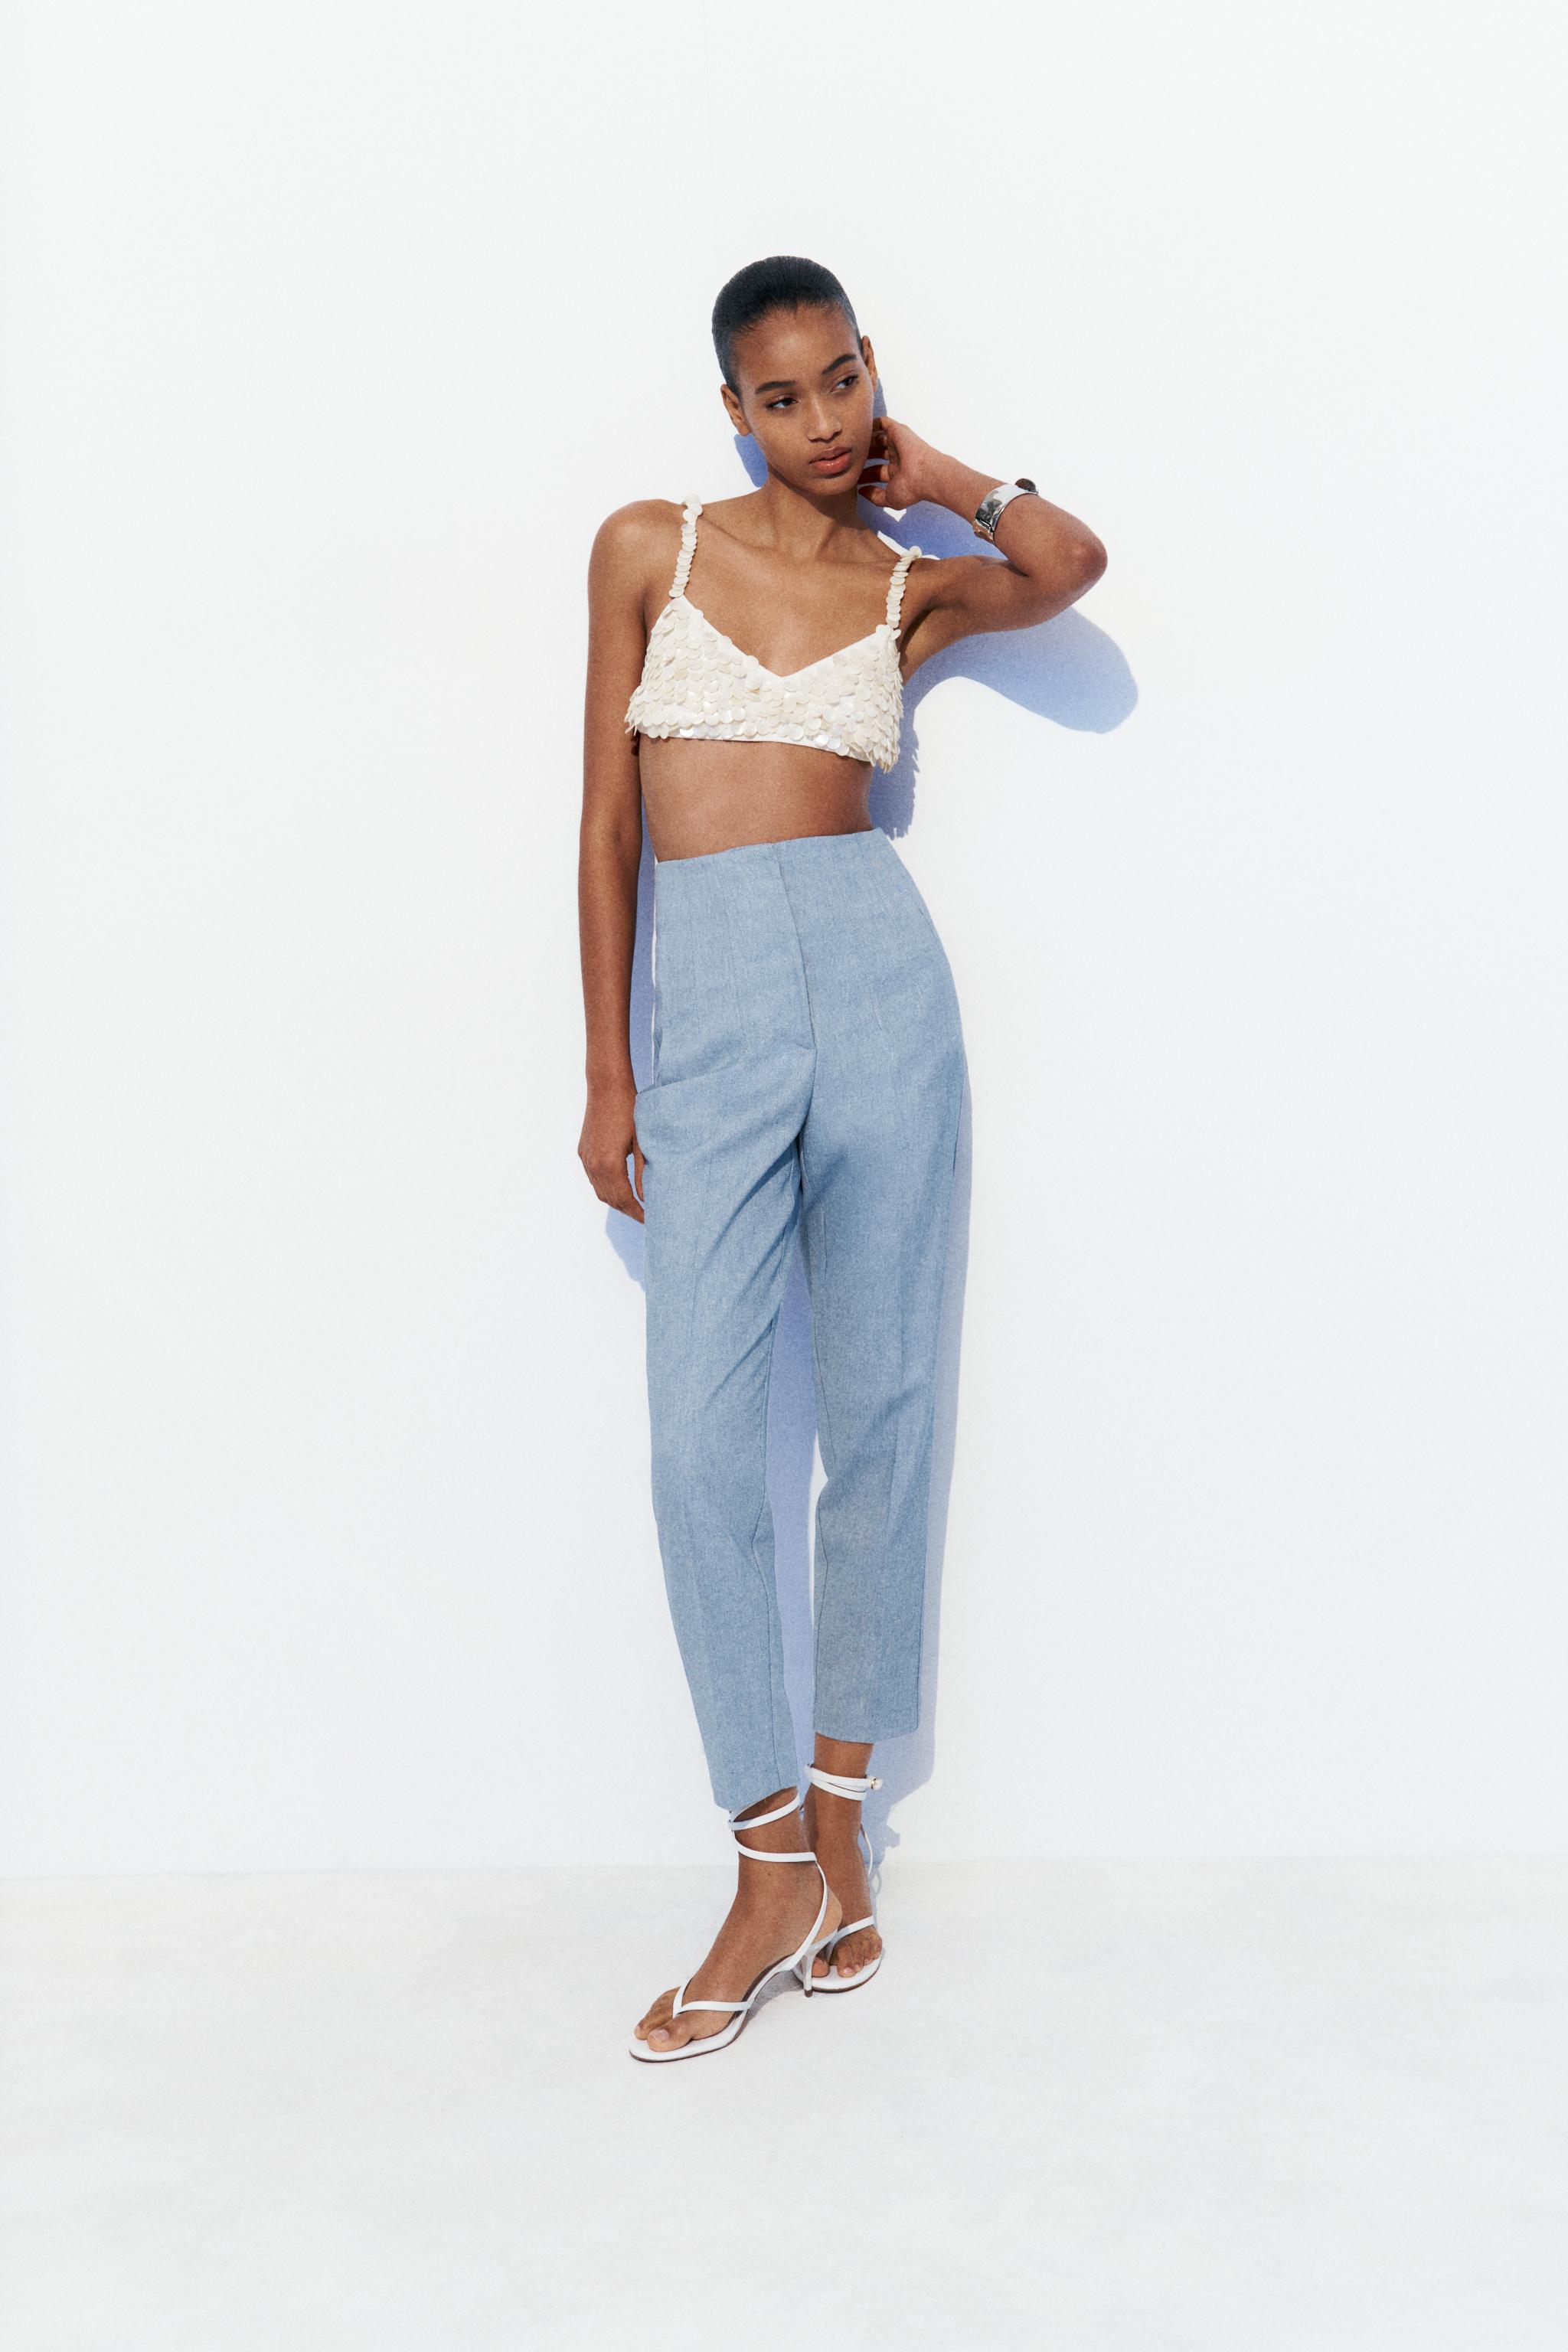 ZARA WOMAN New With Tag HIGH-WAISTED PANTS TROUSERS LIGHT BLUE NEW